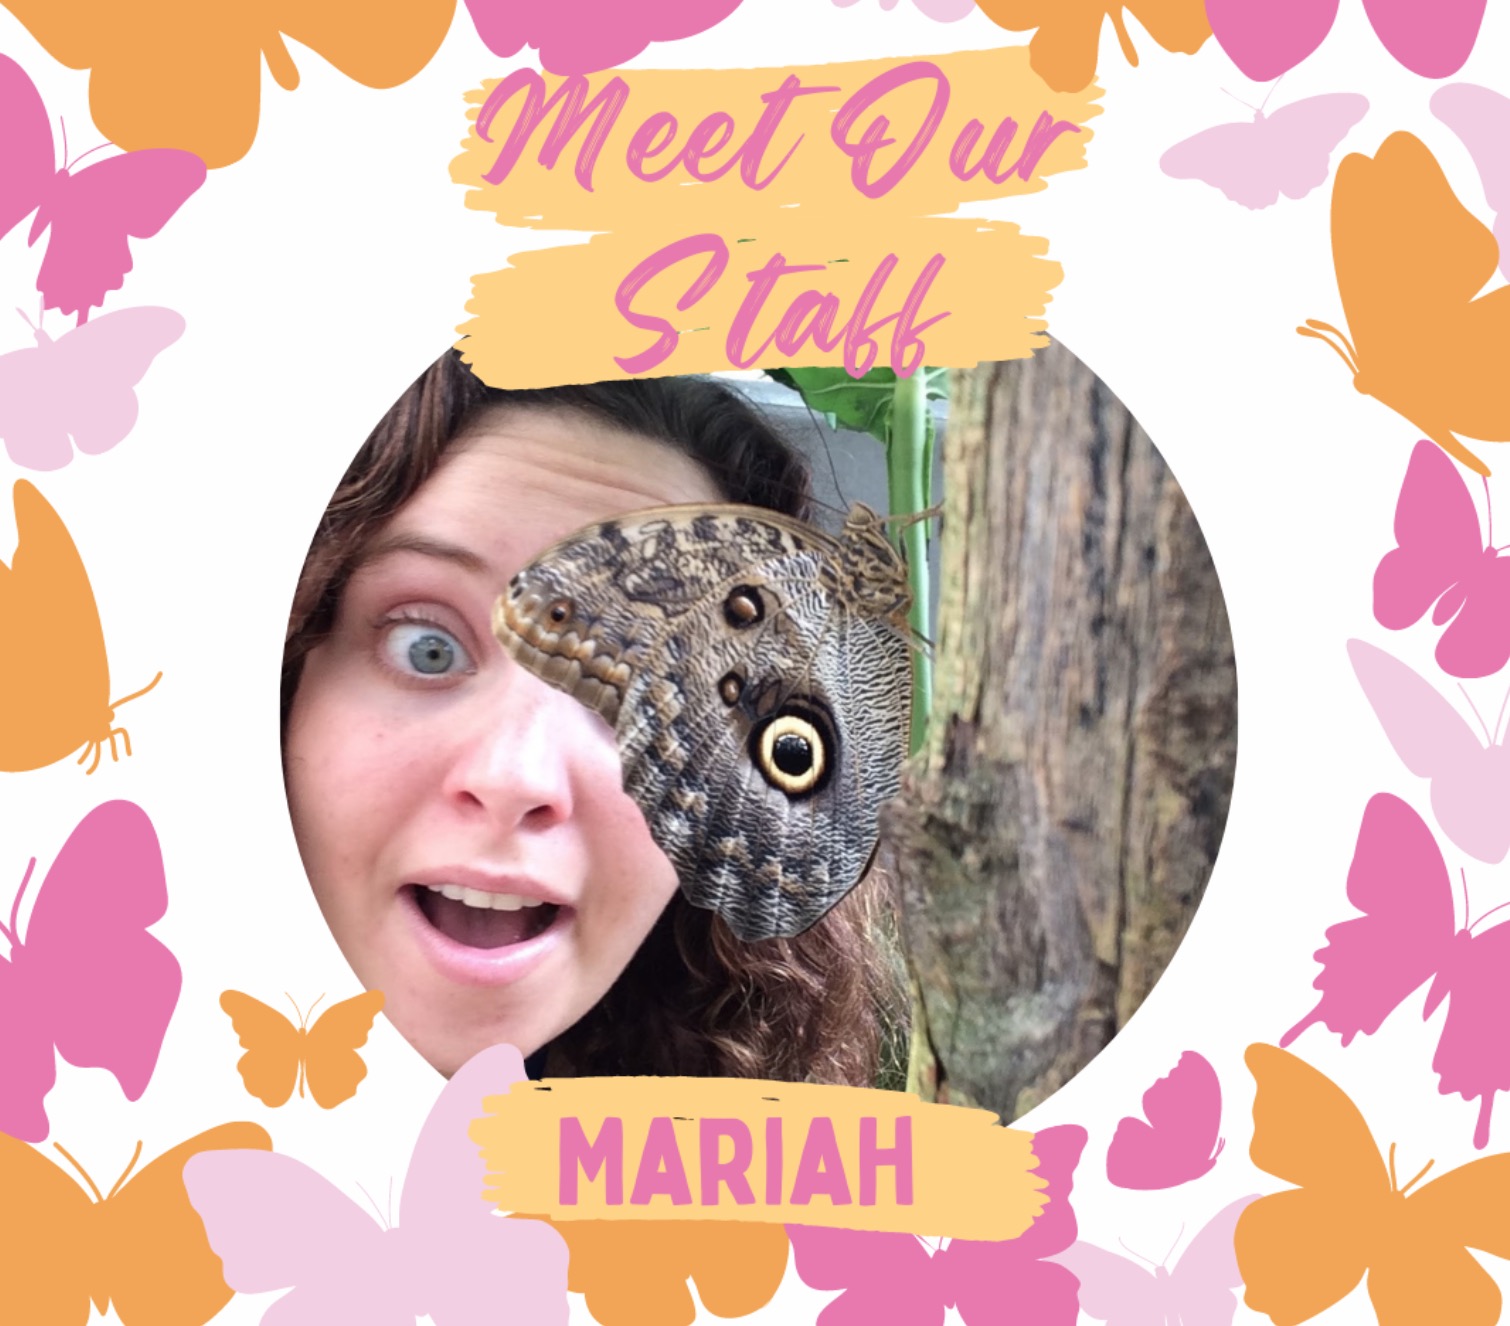 A photo of our staff member Mariah with an Al Butterfly with the words "Meet Our Staff" written above in pink and below the image reads her name. Surrounding the image and words are silhouettes of various butterflies in bright pink, pastel pink, & orange.